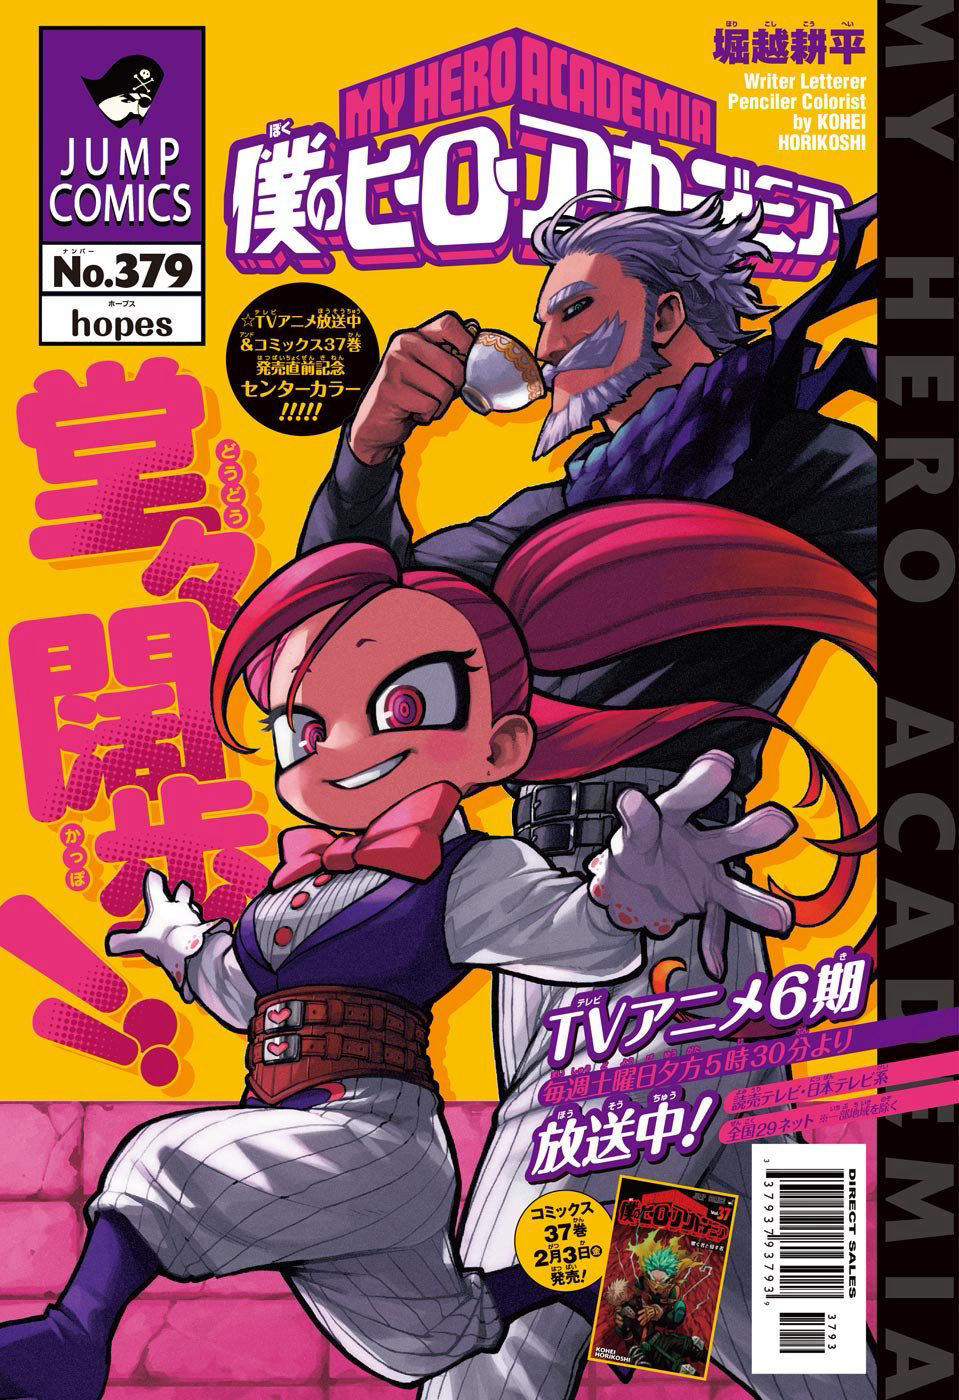 Chapter - Boku no Hero Academia Chapter 402 Discussion